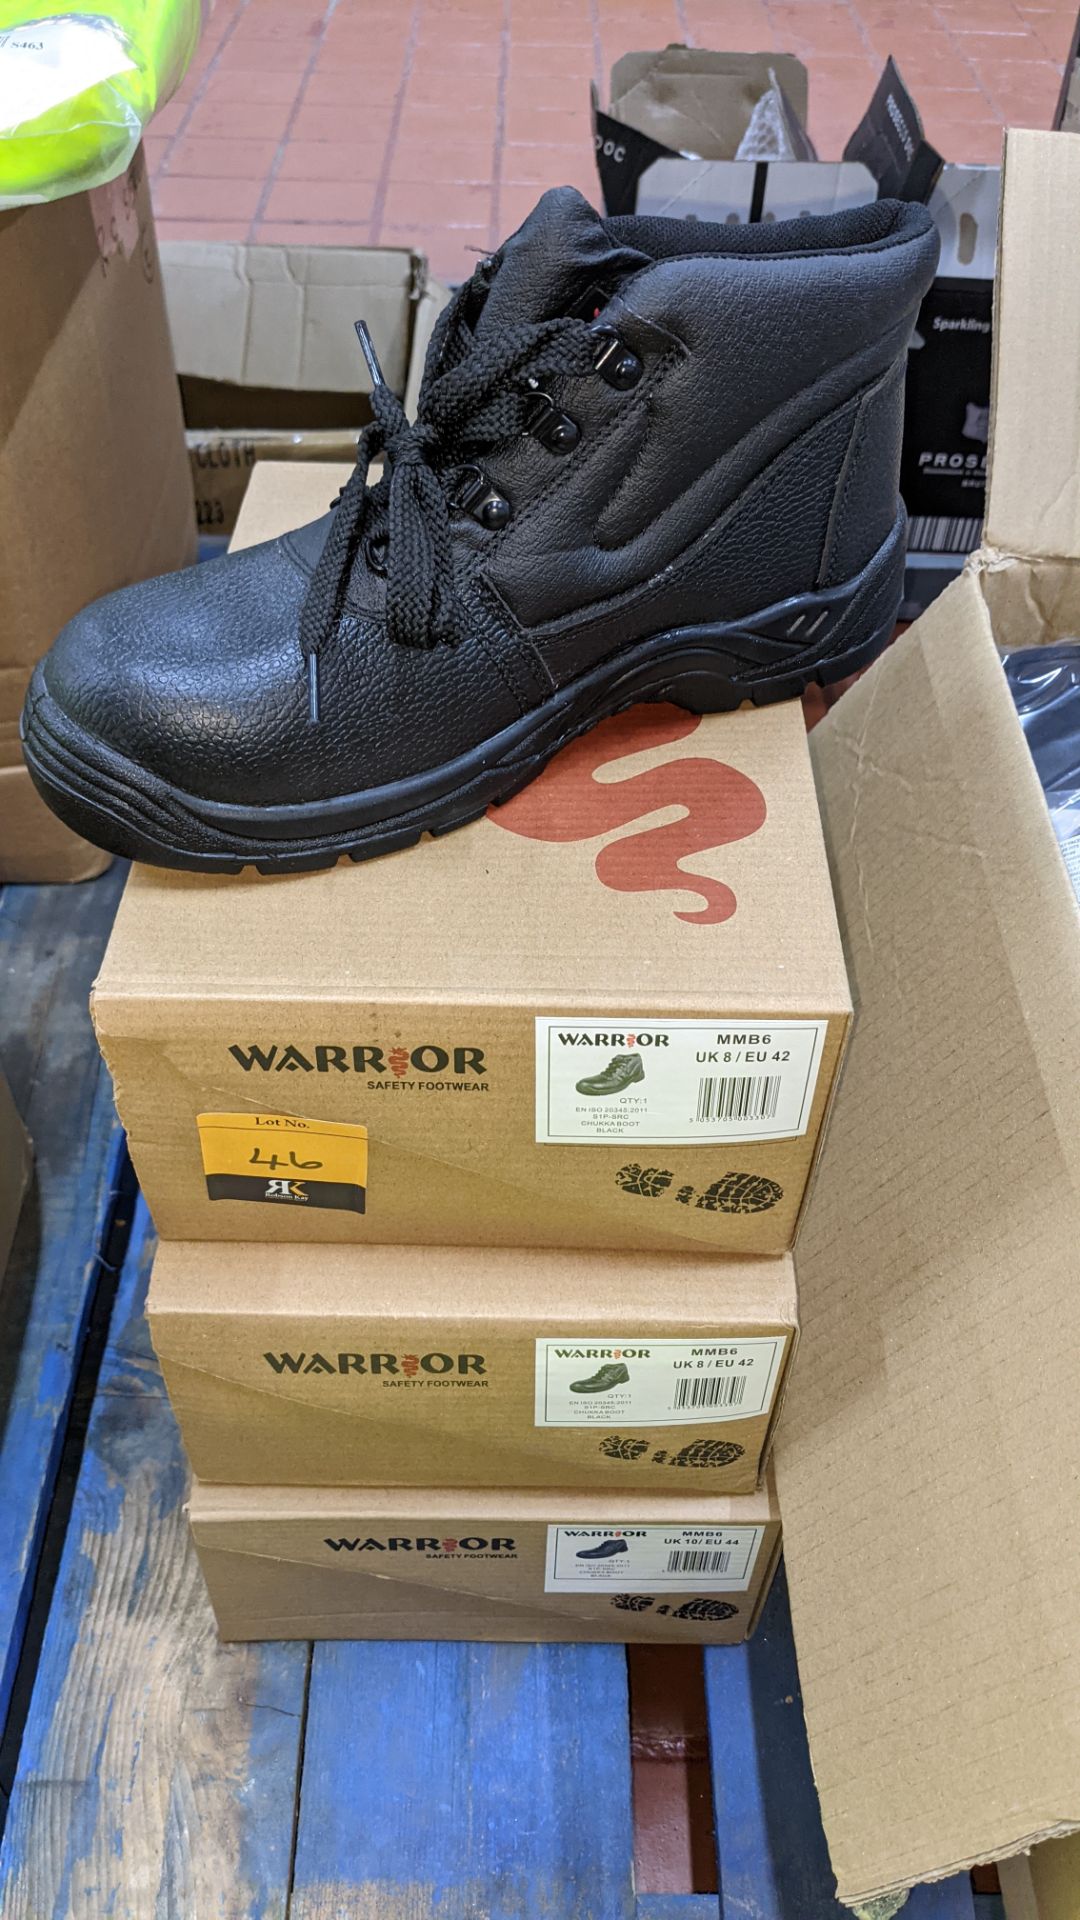 3 pairs of Warrior Chukka black work boots with protective toes, sizes UK8 & UK10